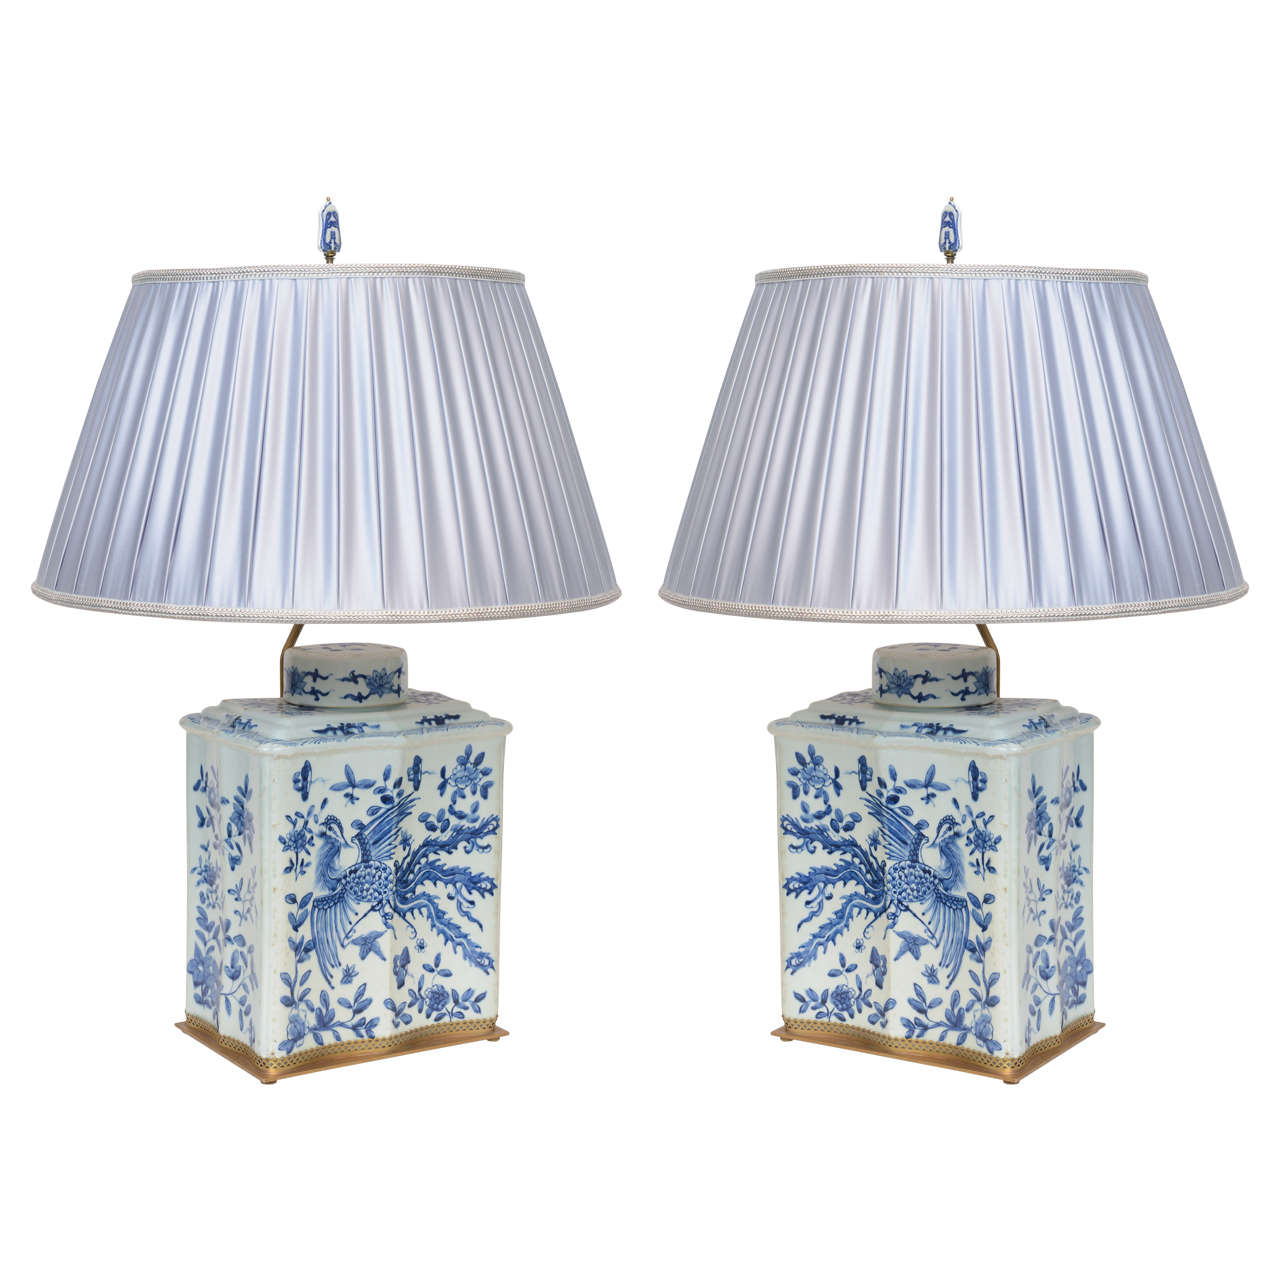 A pair of Chinese Porcelain Concaved and Massive Tea Jar Lamps